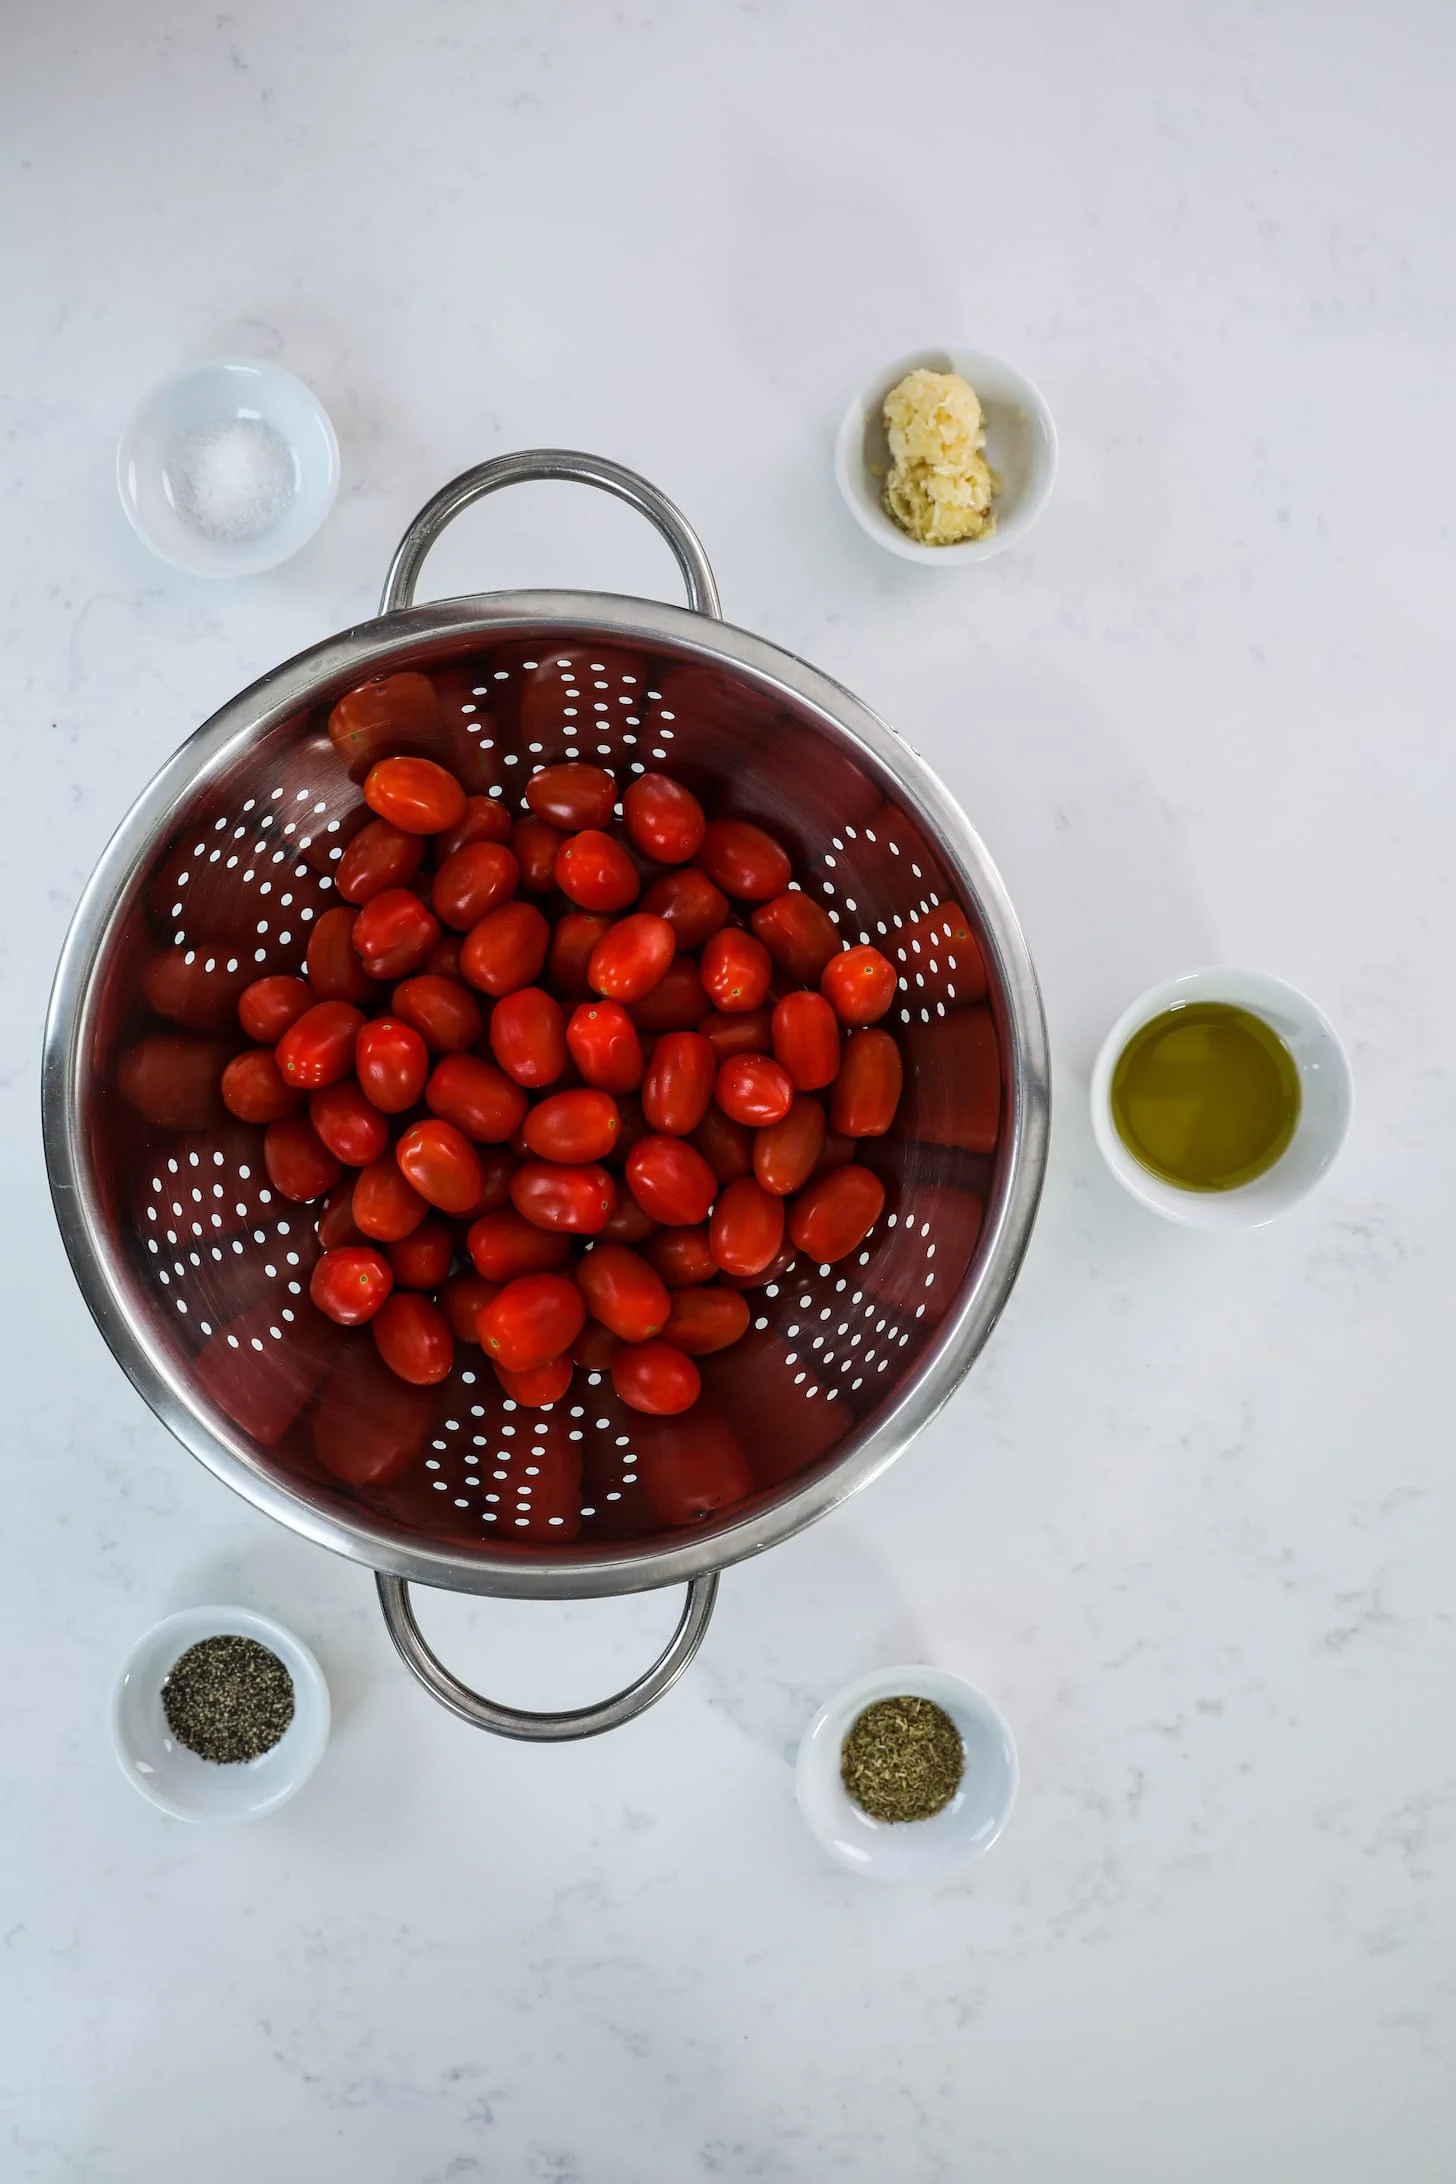 a metal sieve filled with baby red tomatoes surrounded by ramekins of ingredients, including oil, garlic, dried herbs and spices.